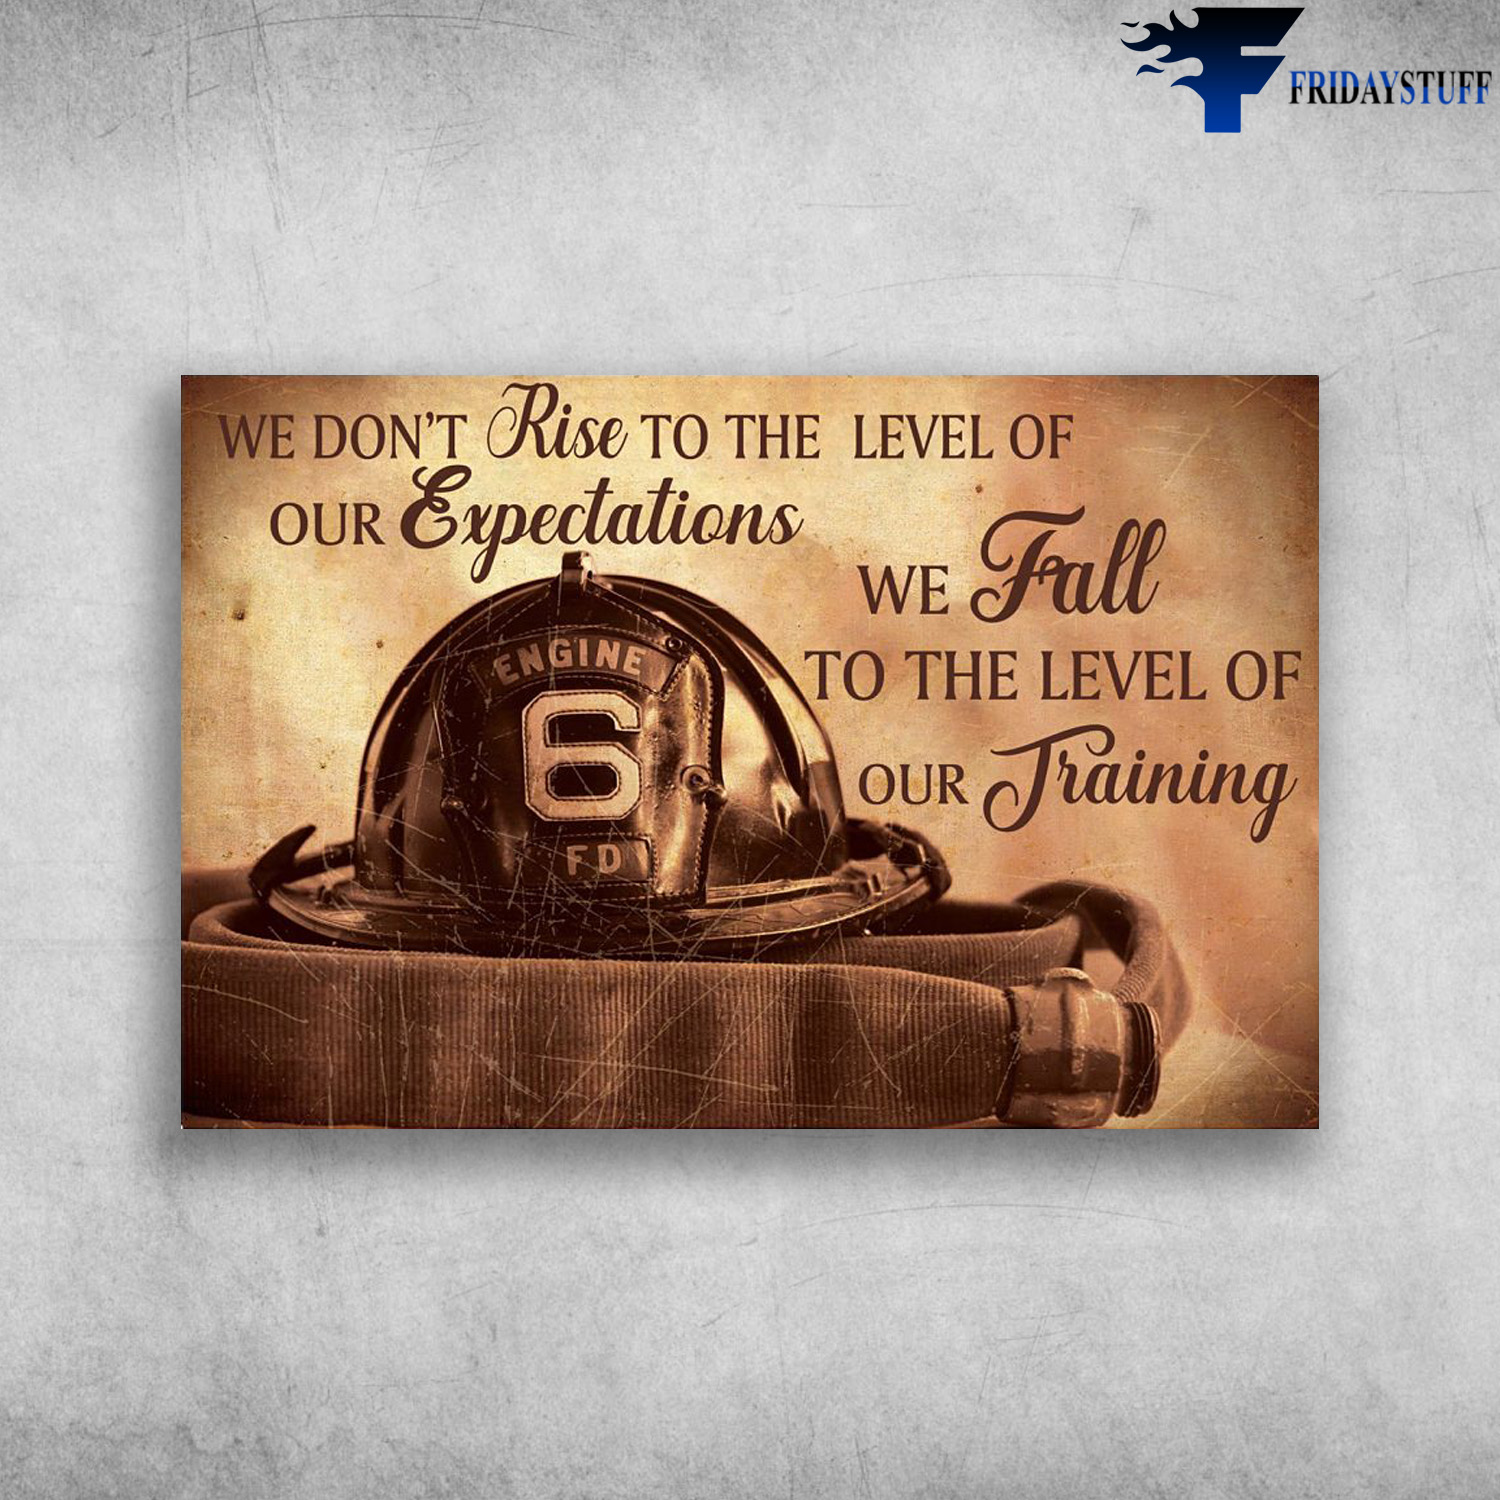 Firefighter Hat - We Don't Rise To The Level Of Our Expectations, We Fall To The Level Of Our Training